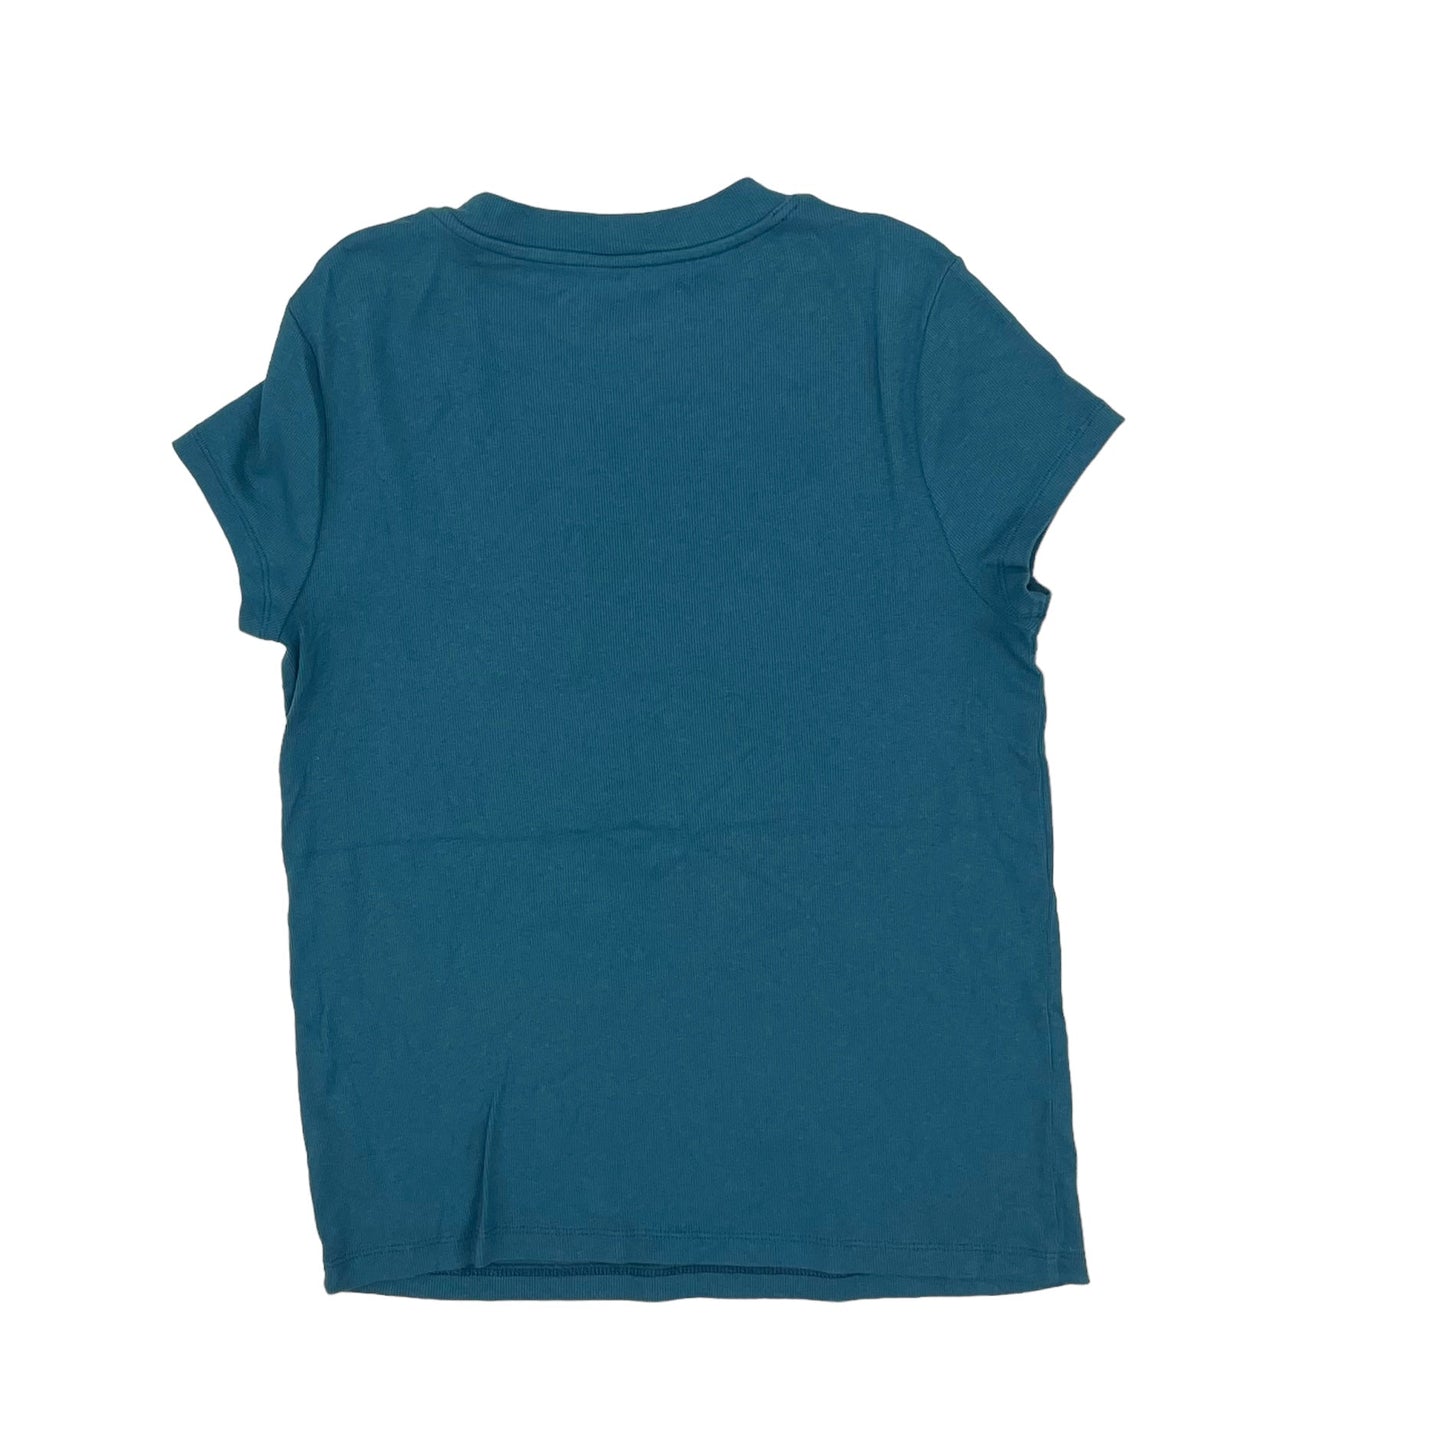 BLUE A NEW DAY TOP SS BASIC, Size XL